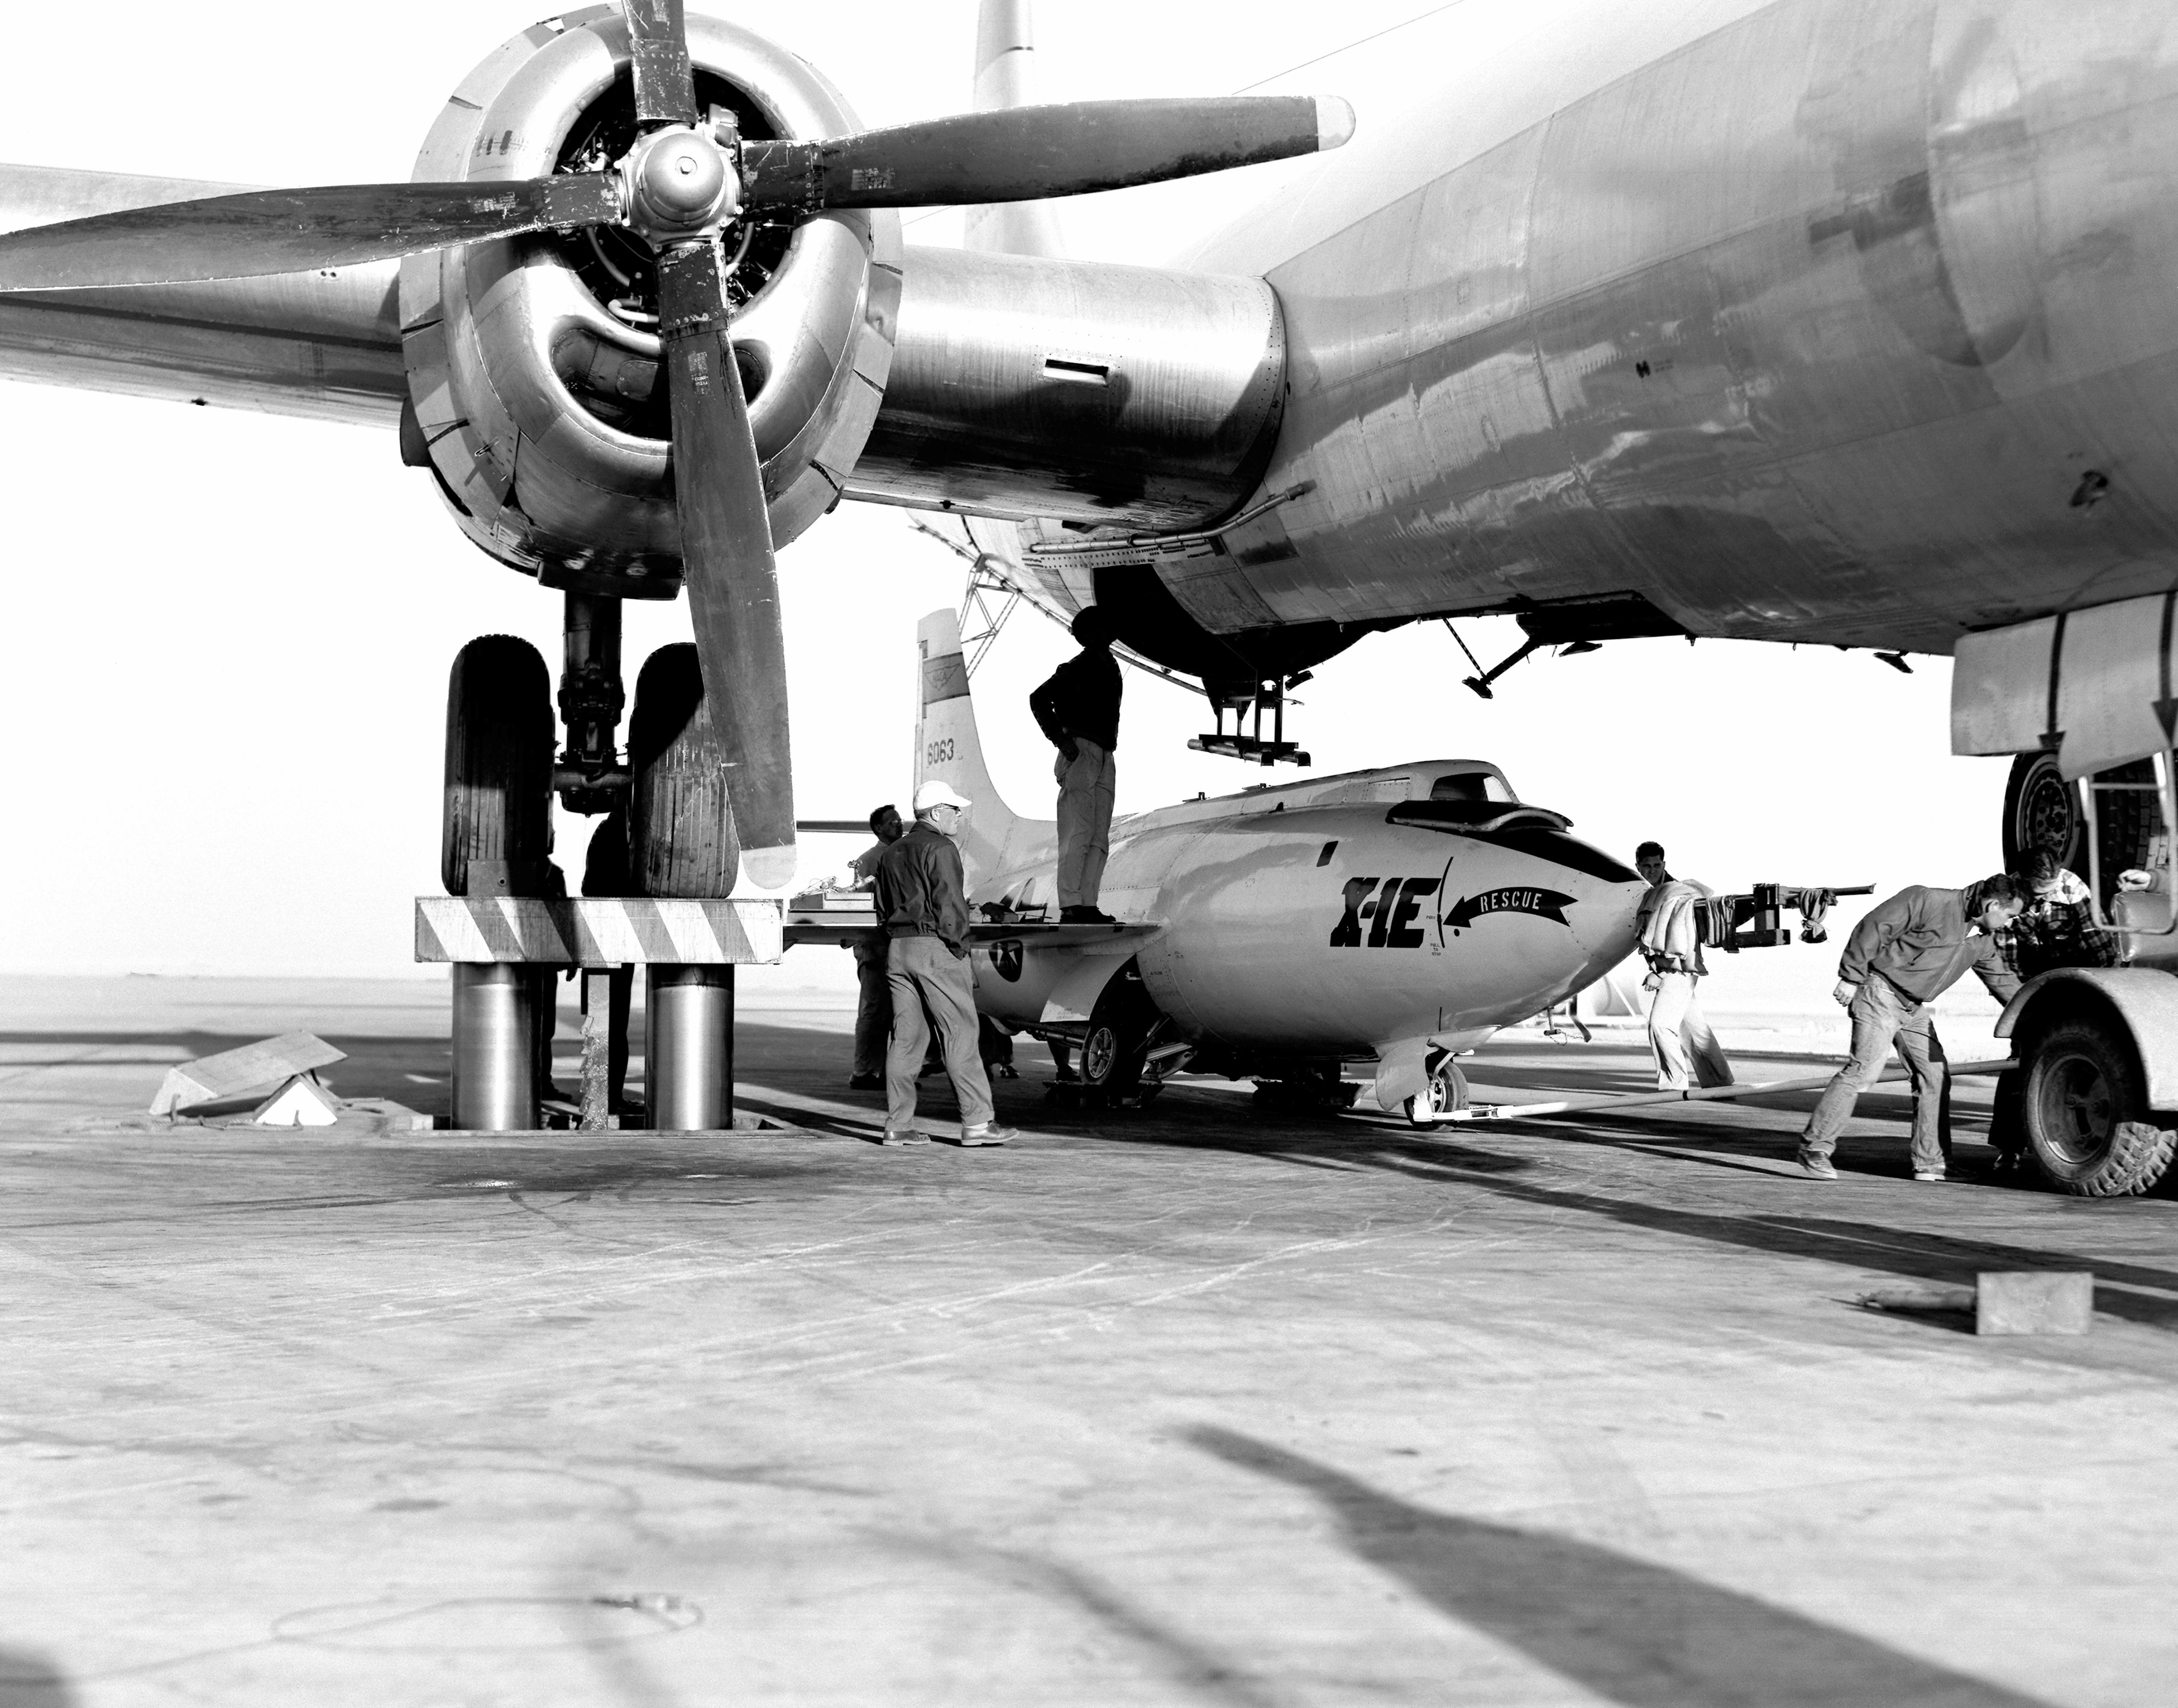 The Bell X-1E rocketplane being loaded into a Boeing B-29 Superfortress mothership for another test flight. (NASA)